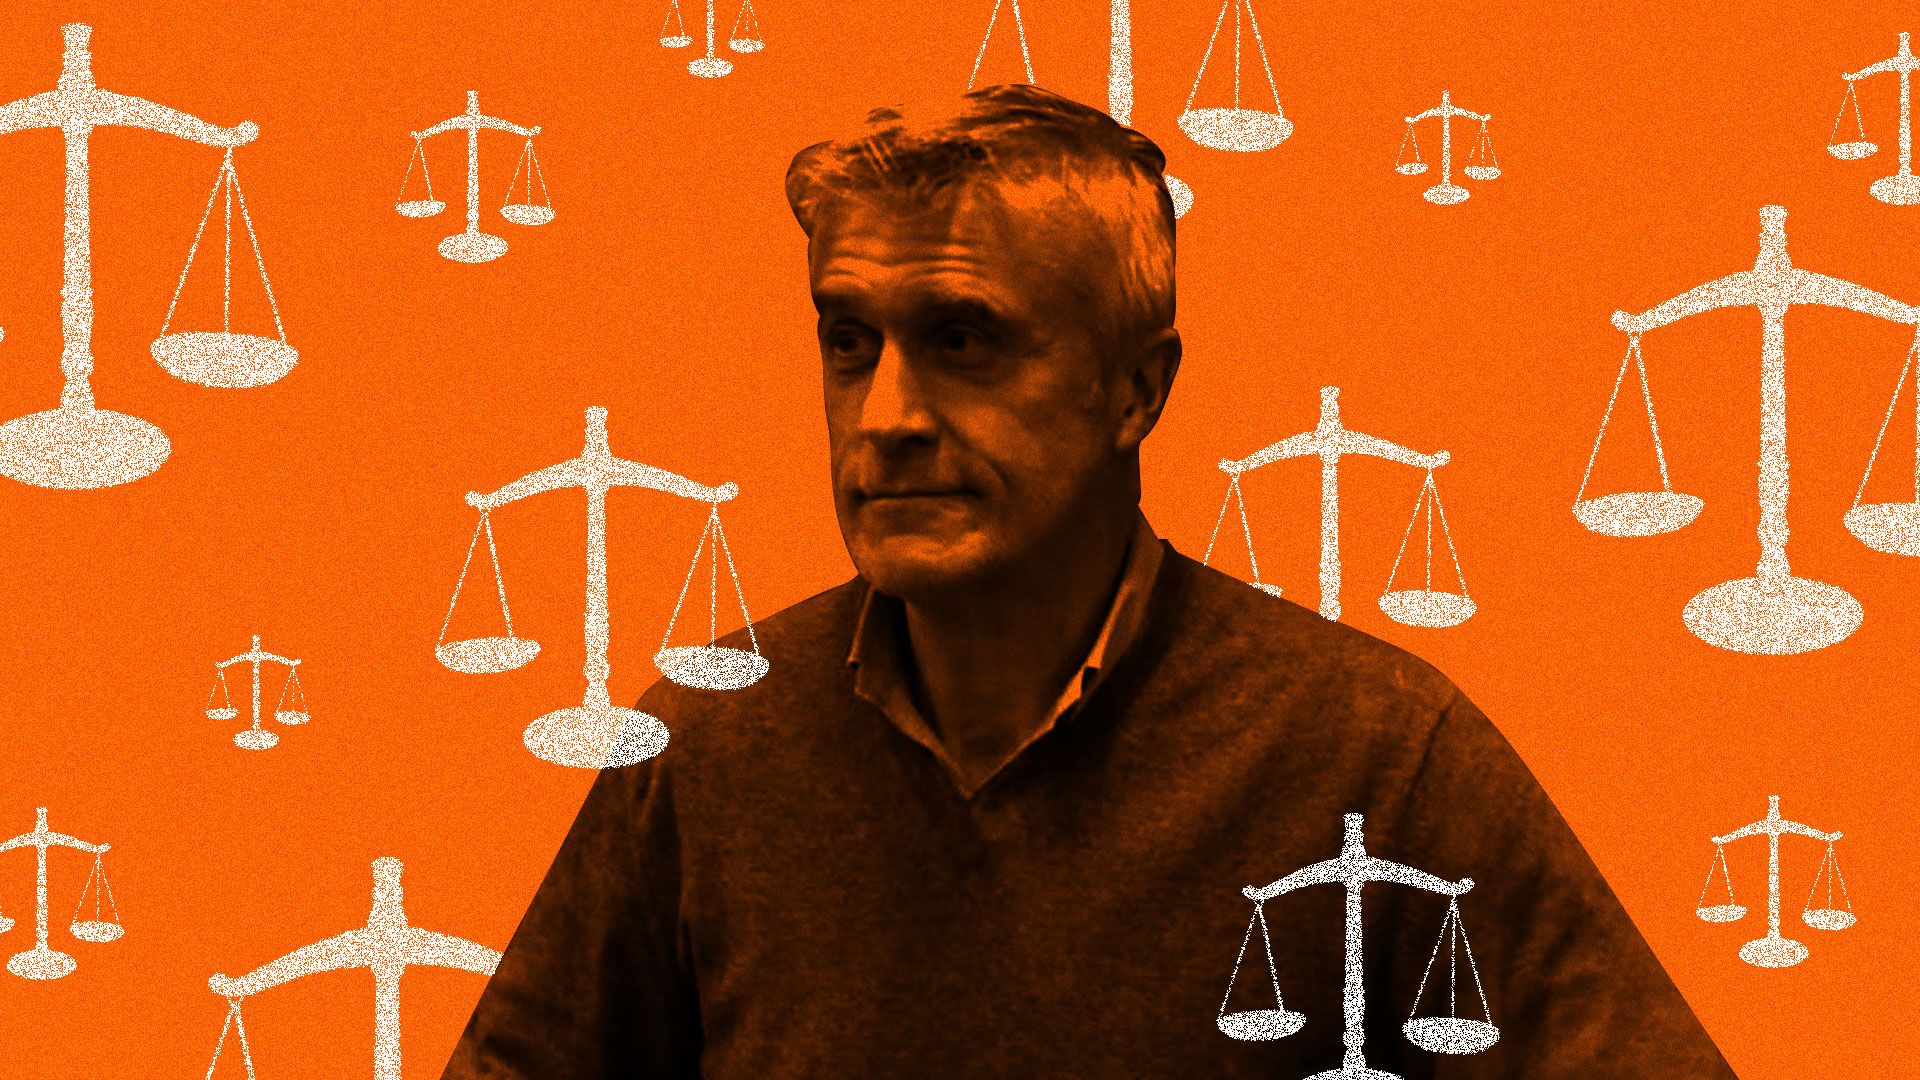 In this image, Mike Calvey stands in front of a red-orange background decorated with various scales of justice. 